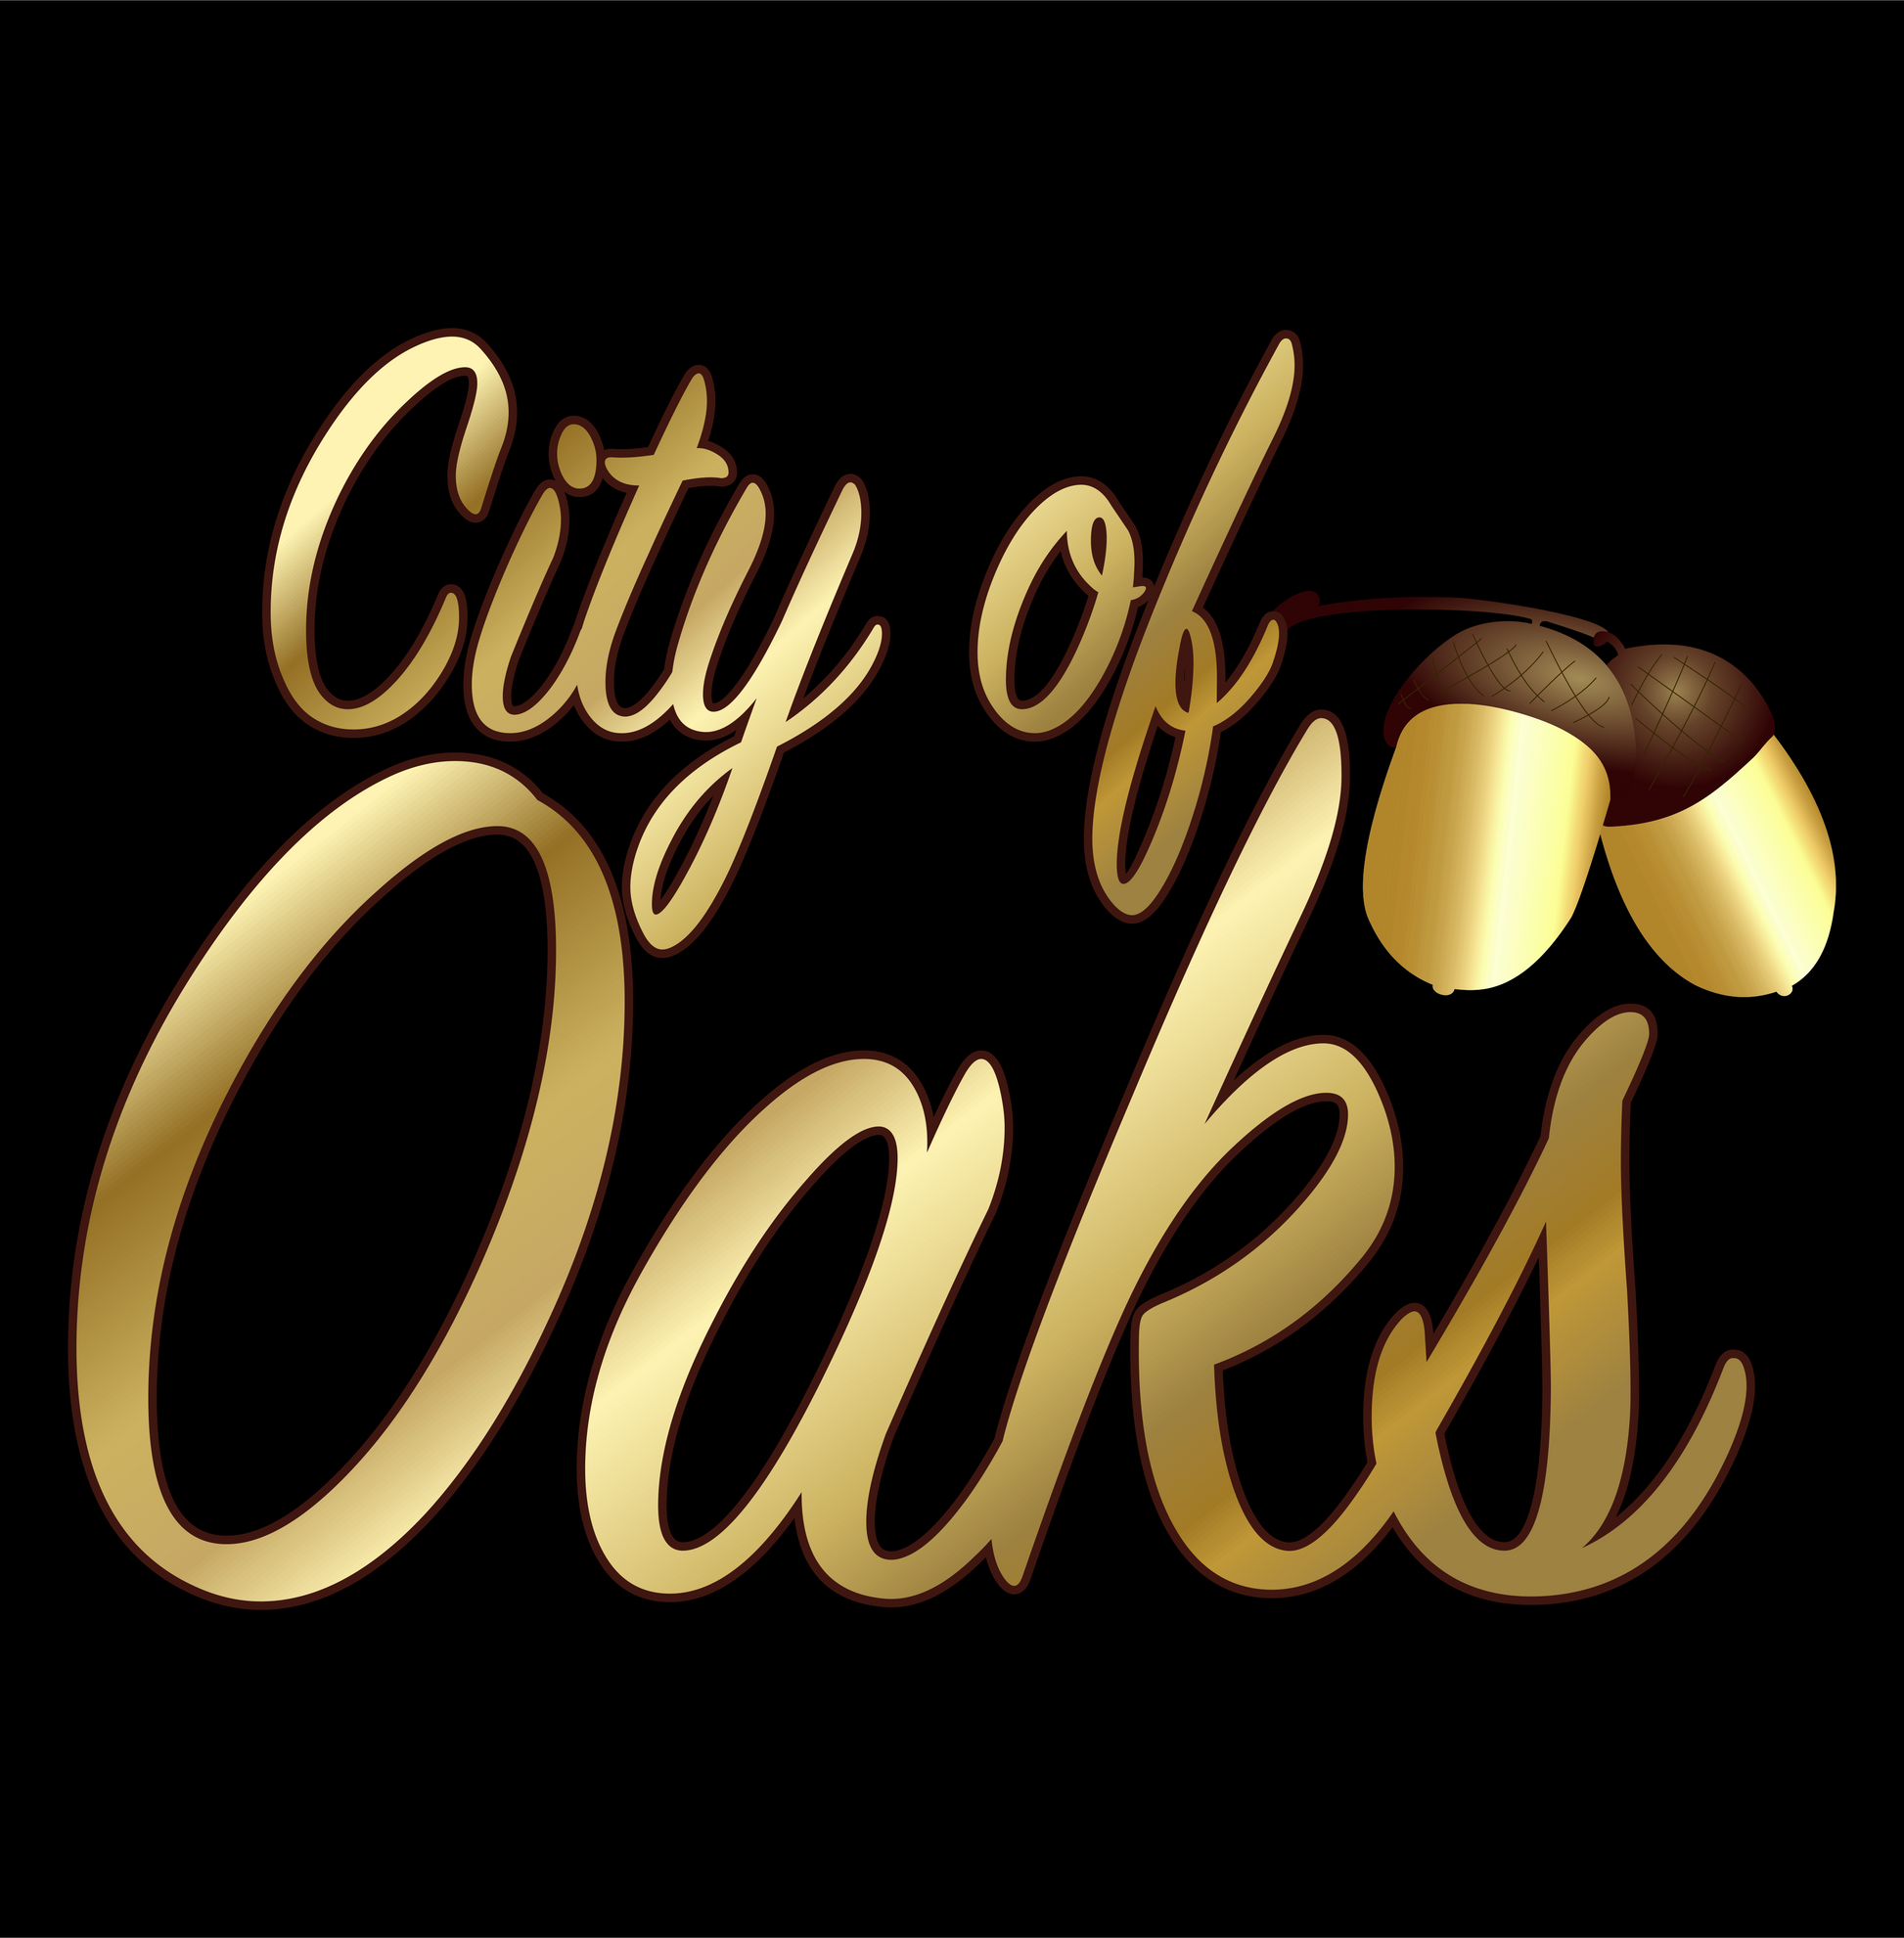 city of oaks raleigh nc DTG design graphic